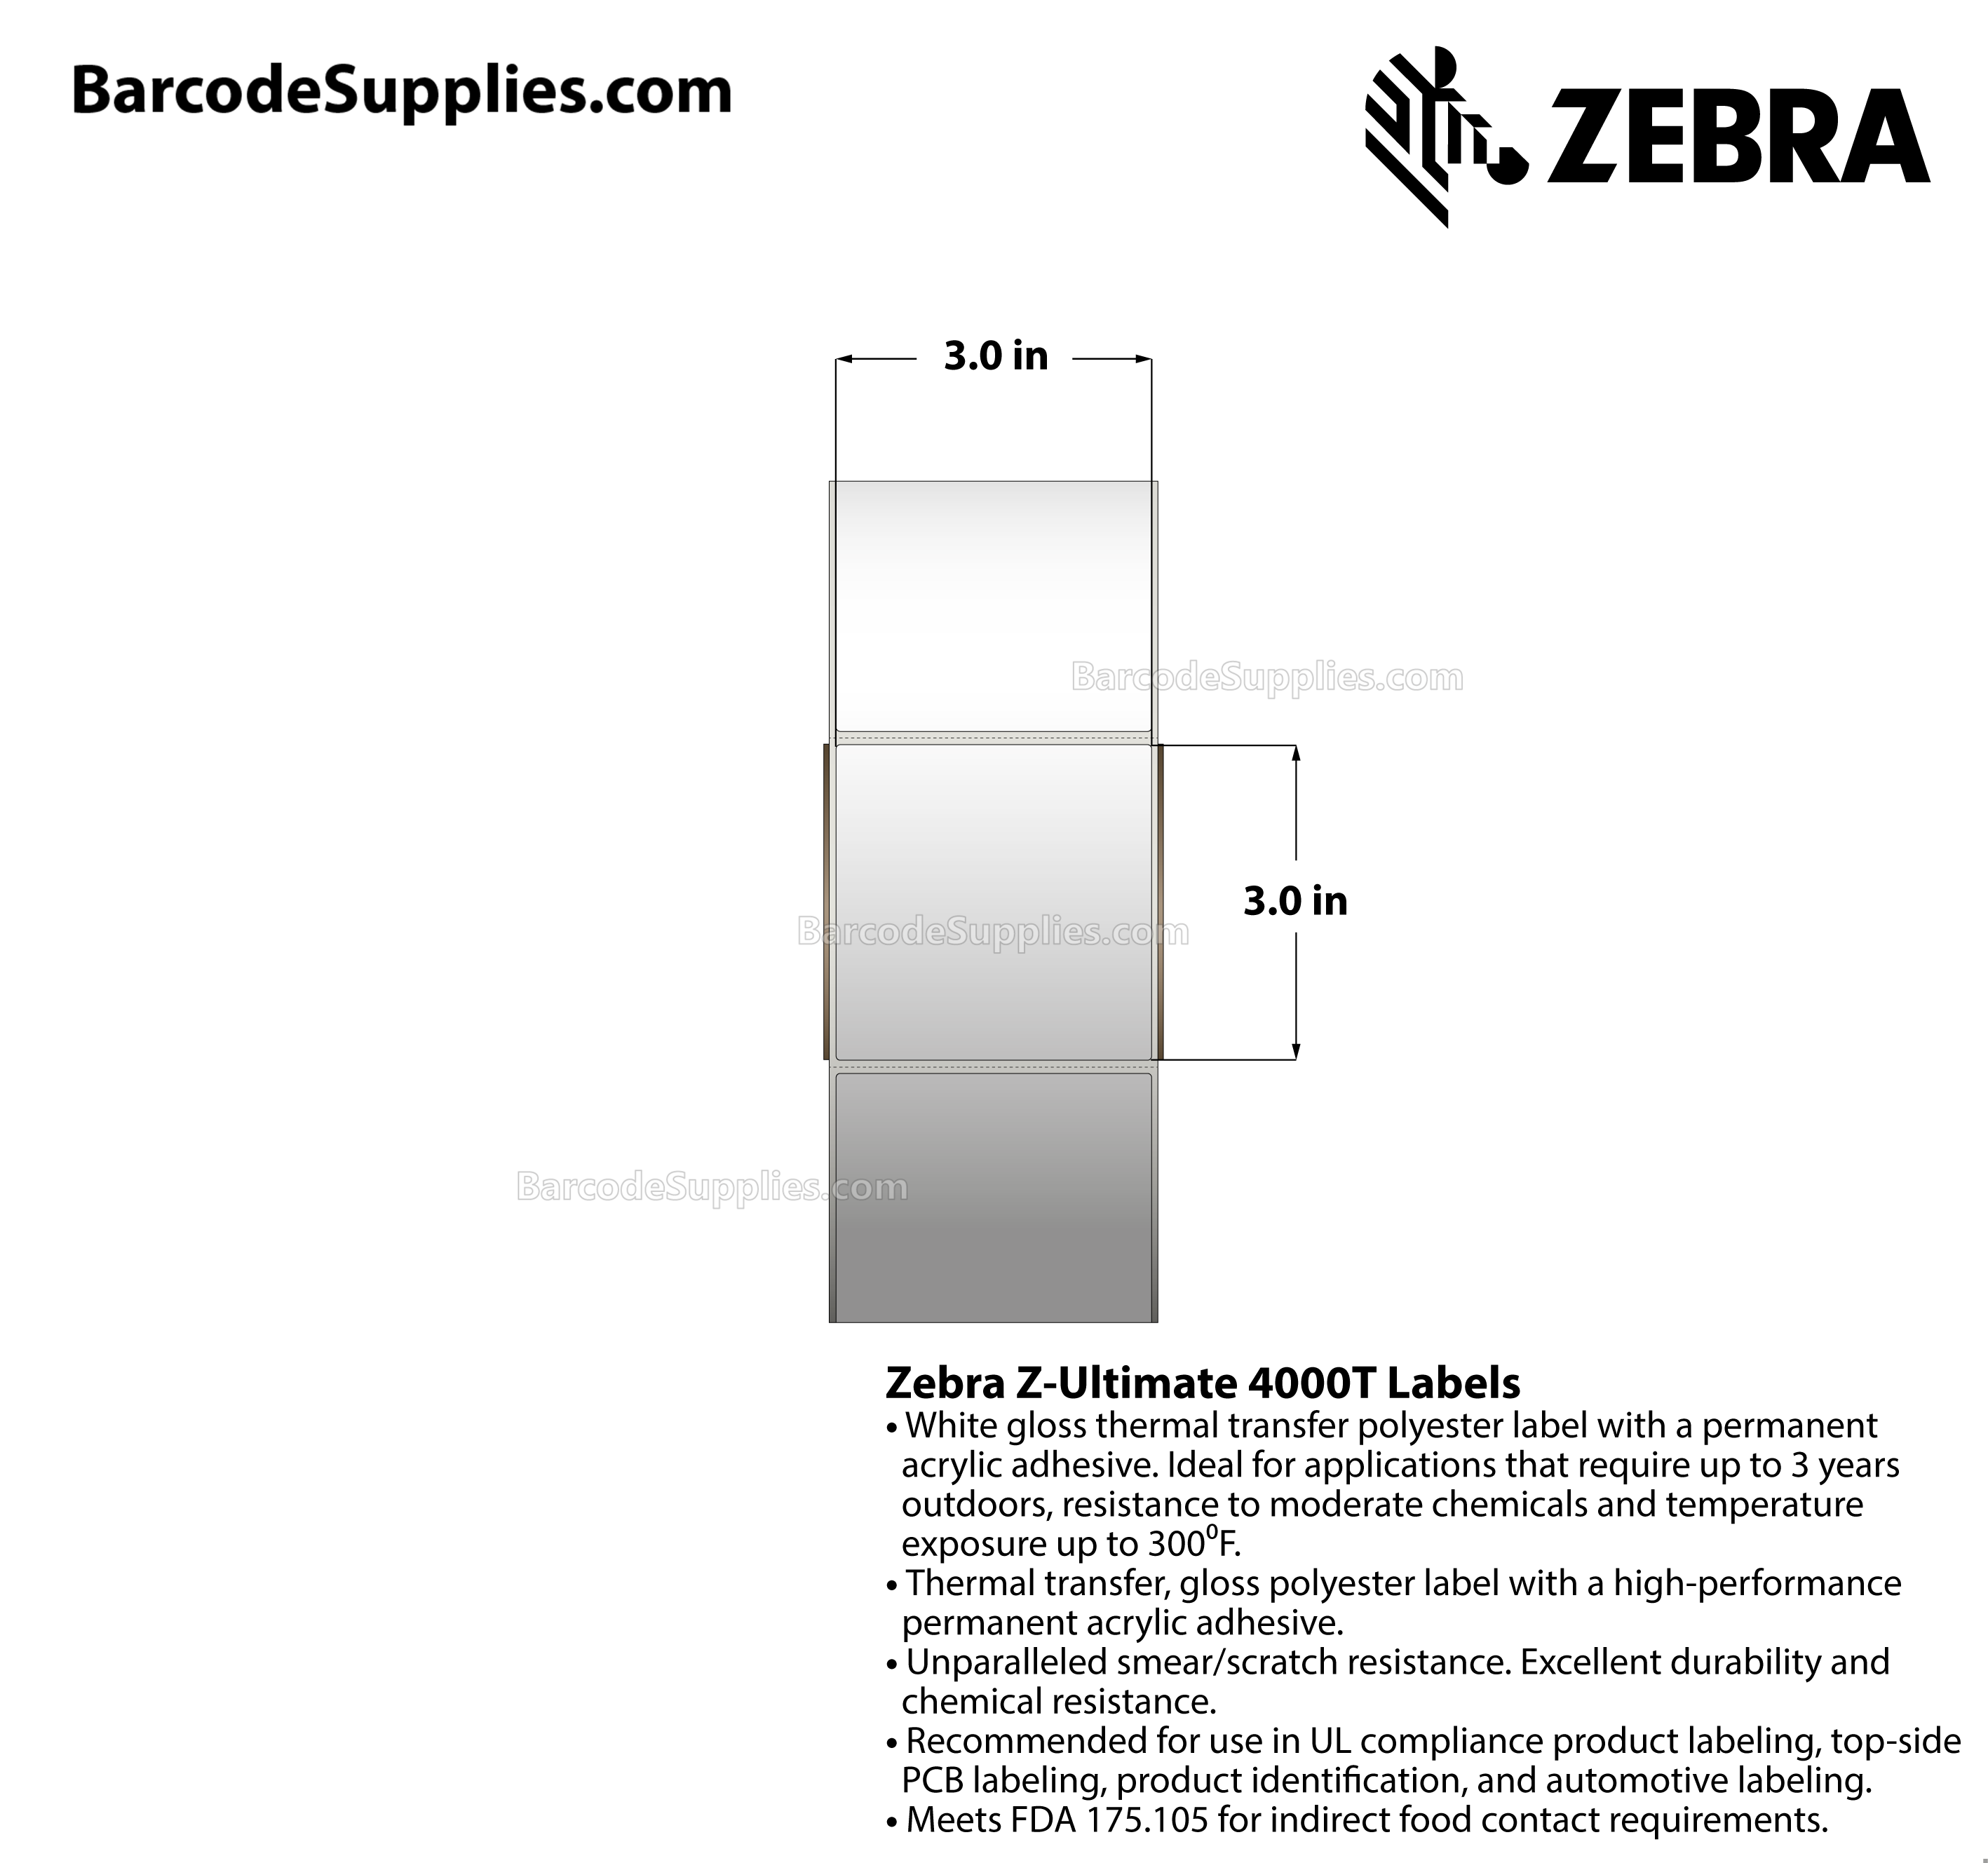 3 x 3 Thermal Transfer White Z-Ultimate 4000T Labels With Permanent Adhesive - Perforated - 1880 Labels Per Roll - Carton Of 4 Rolls - 7520 Labels Total - MPN: 10011710